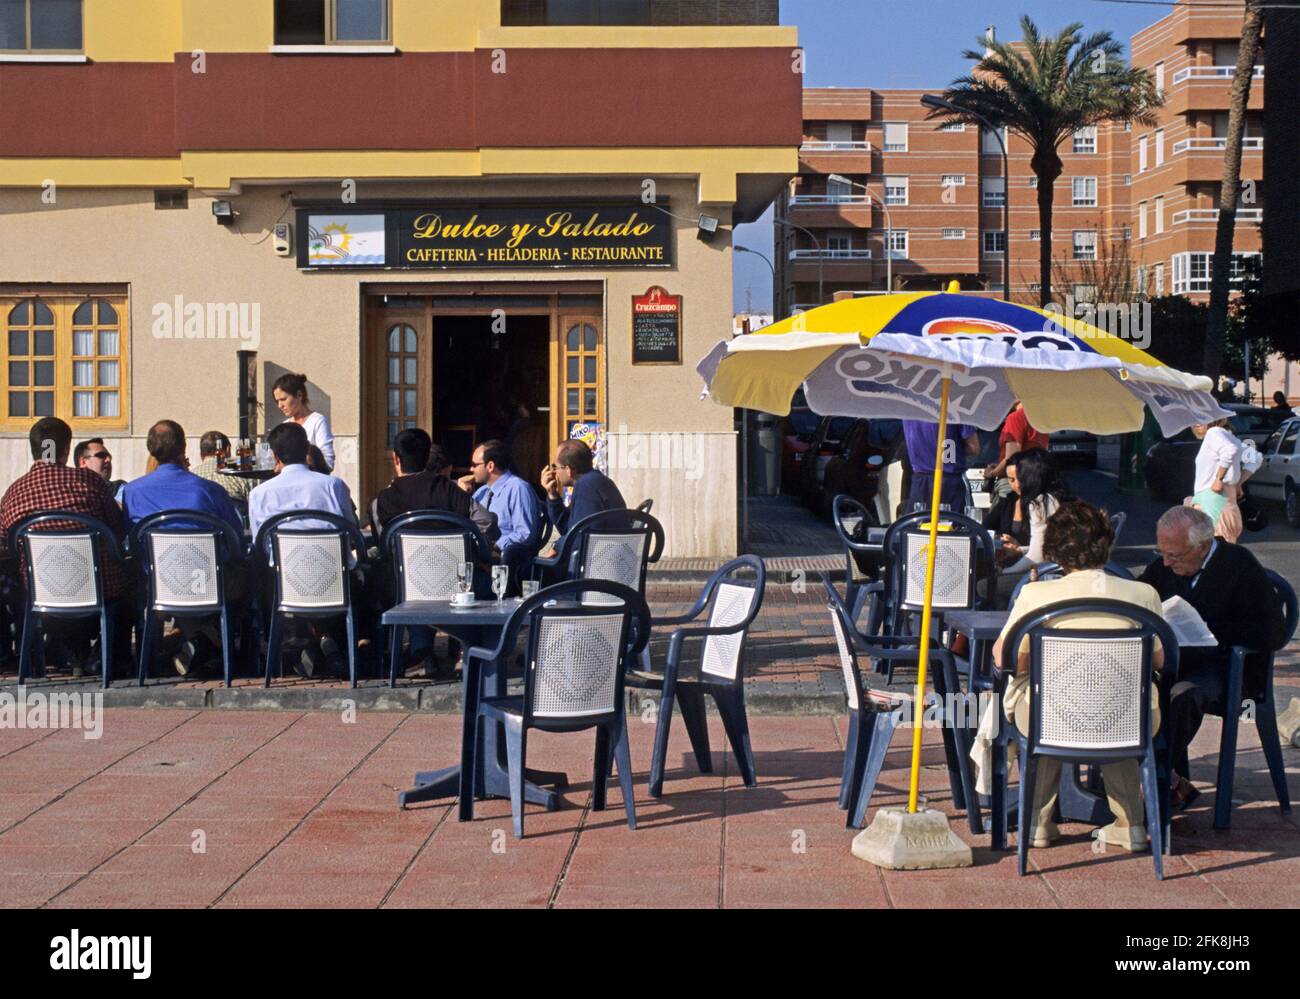 outdoor cafe and restaurant  in Almeria, Andalusia, Spain Stock Photo